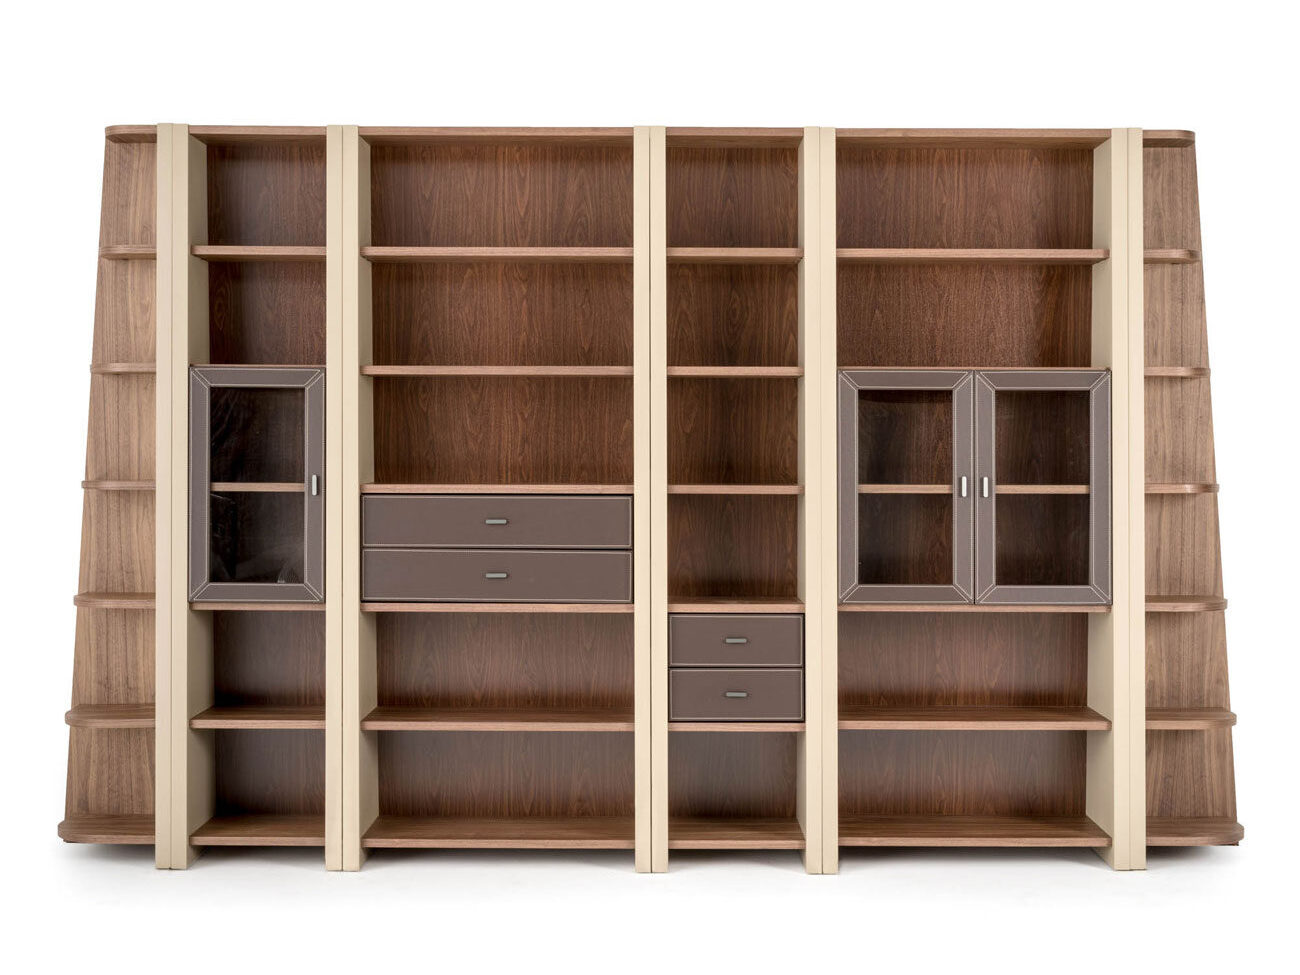 Neghan bookcase by Mobilia